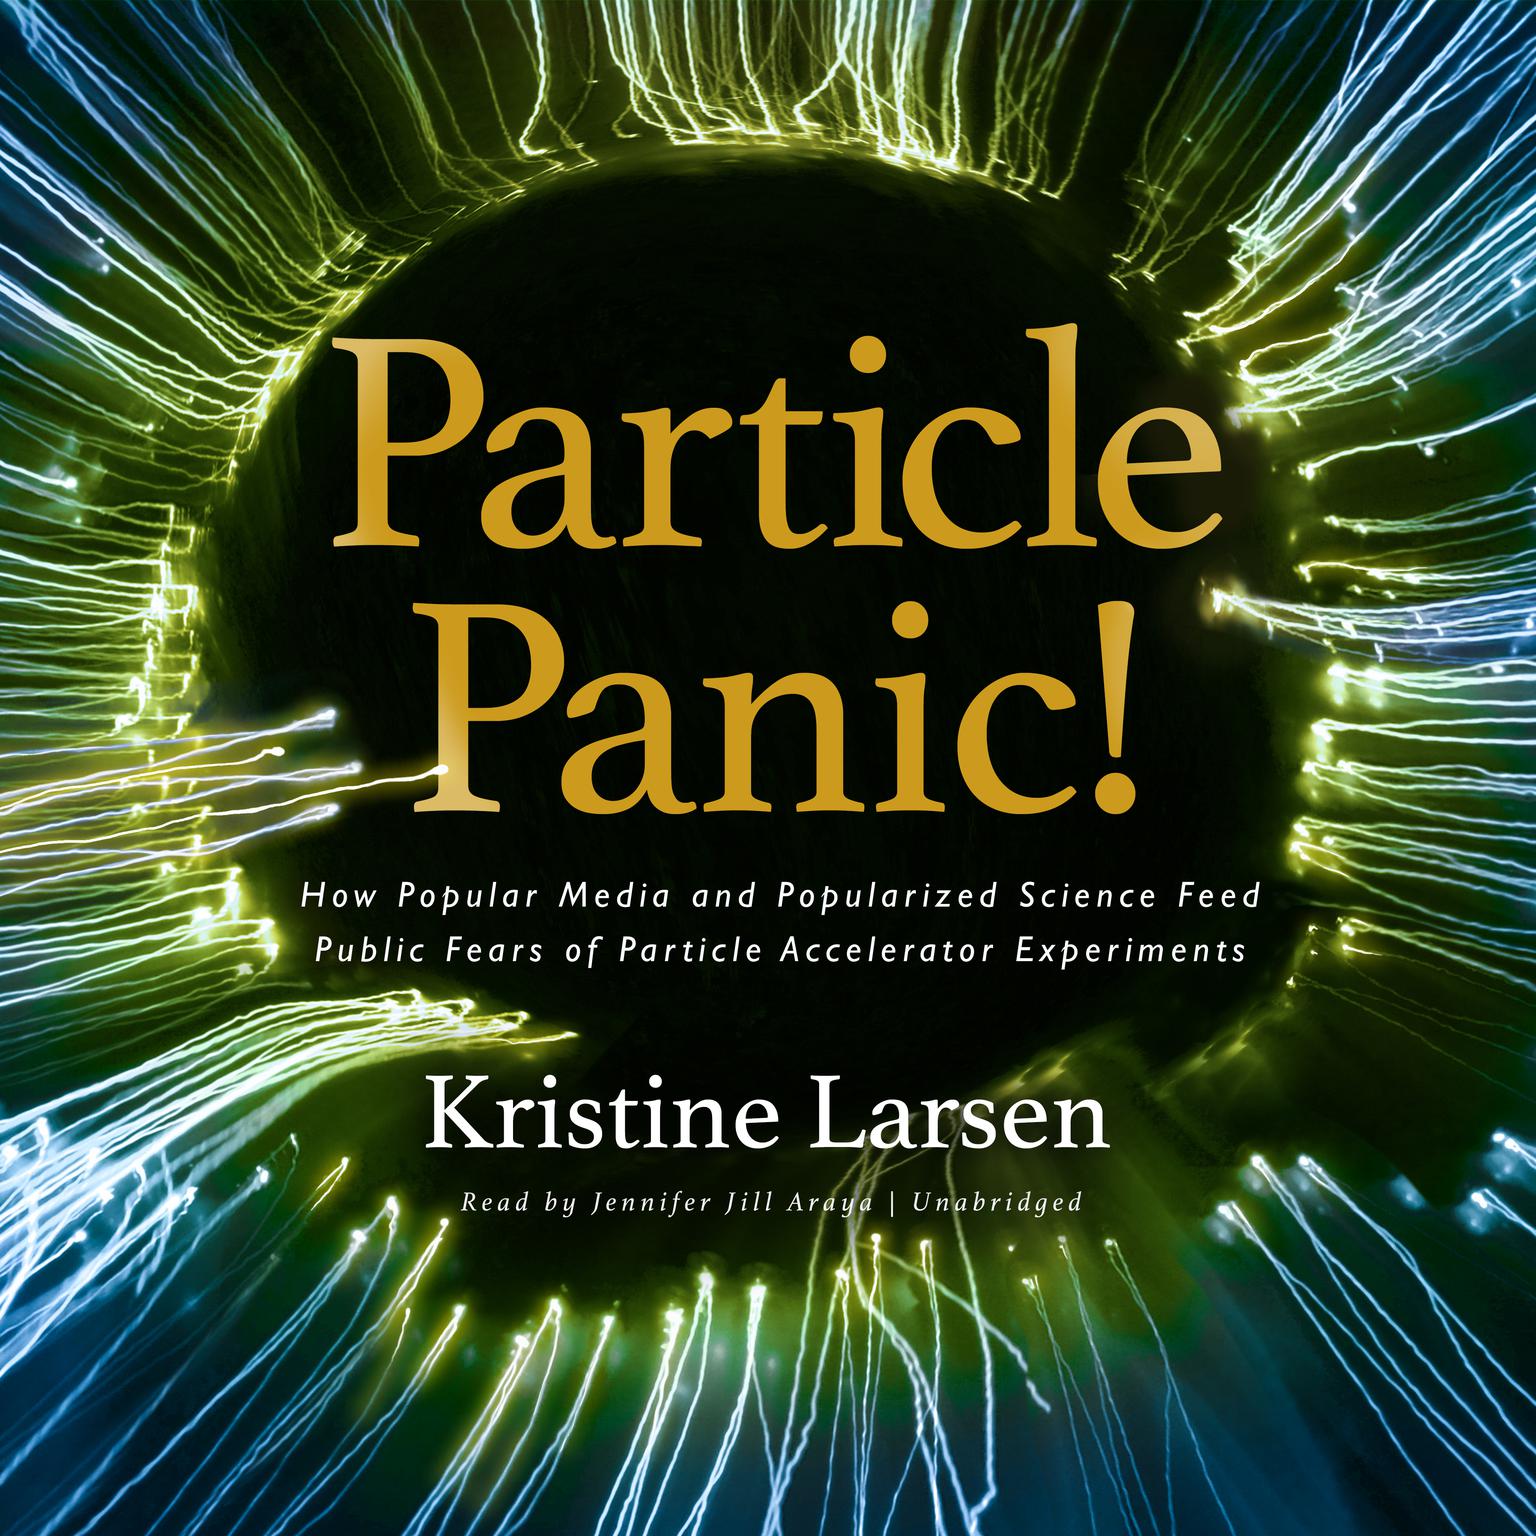 Particle Panic!: How Popular Media and Popularized Science Feed Public Fears of Particle Accelerator Experiments  Audiobook, by Kristine Larsen